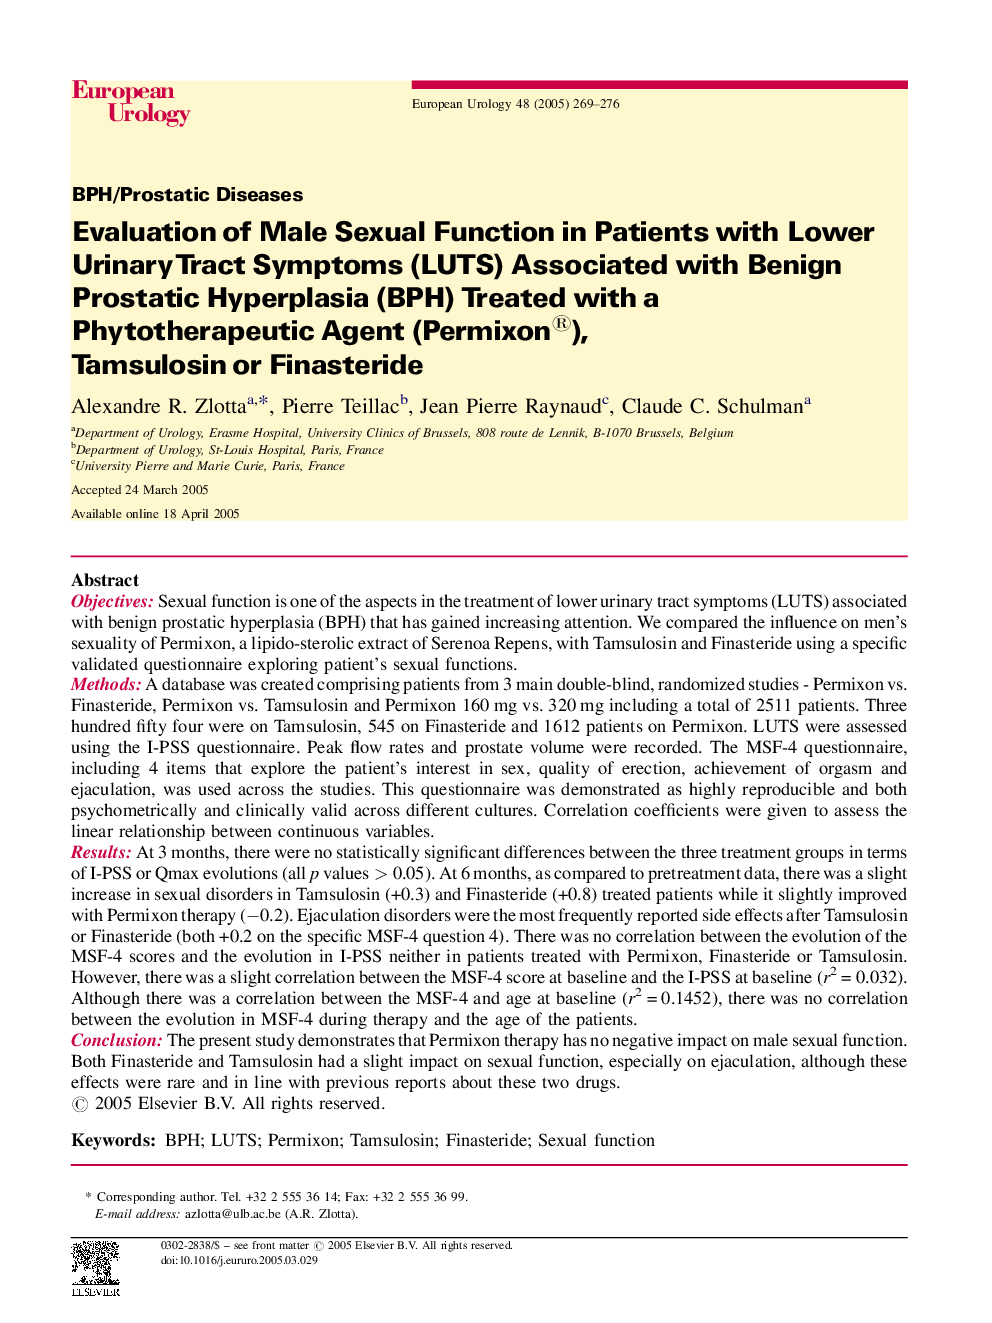 Evaluation of Male Sexual Function in Patients with Lower Urinary Tract Symptoms (LUTS) Associated with Benign Prostatic Hyperplasia (BPH) Treated with a Phytotherapeutic Agent (Permixon®), Tamsulosin or Finasteride